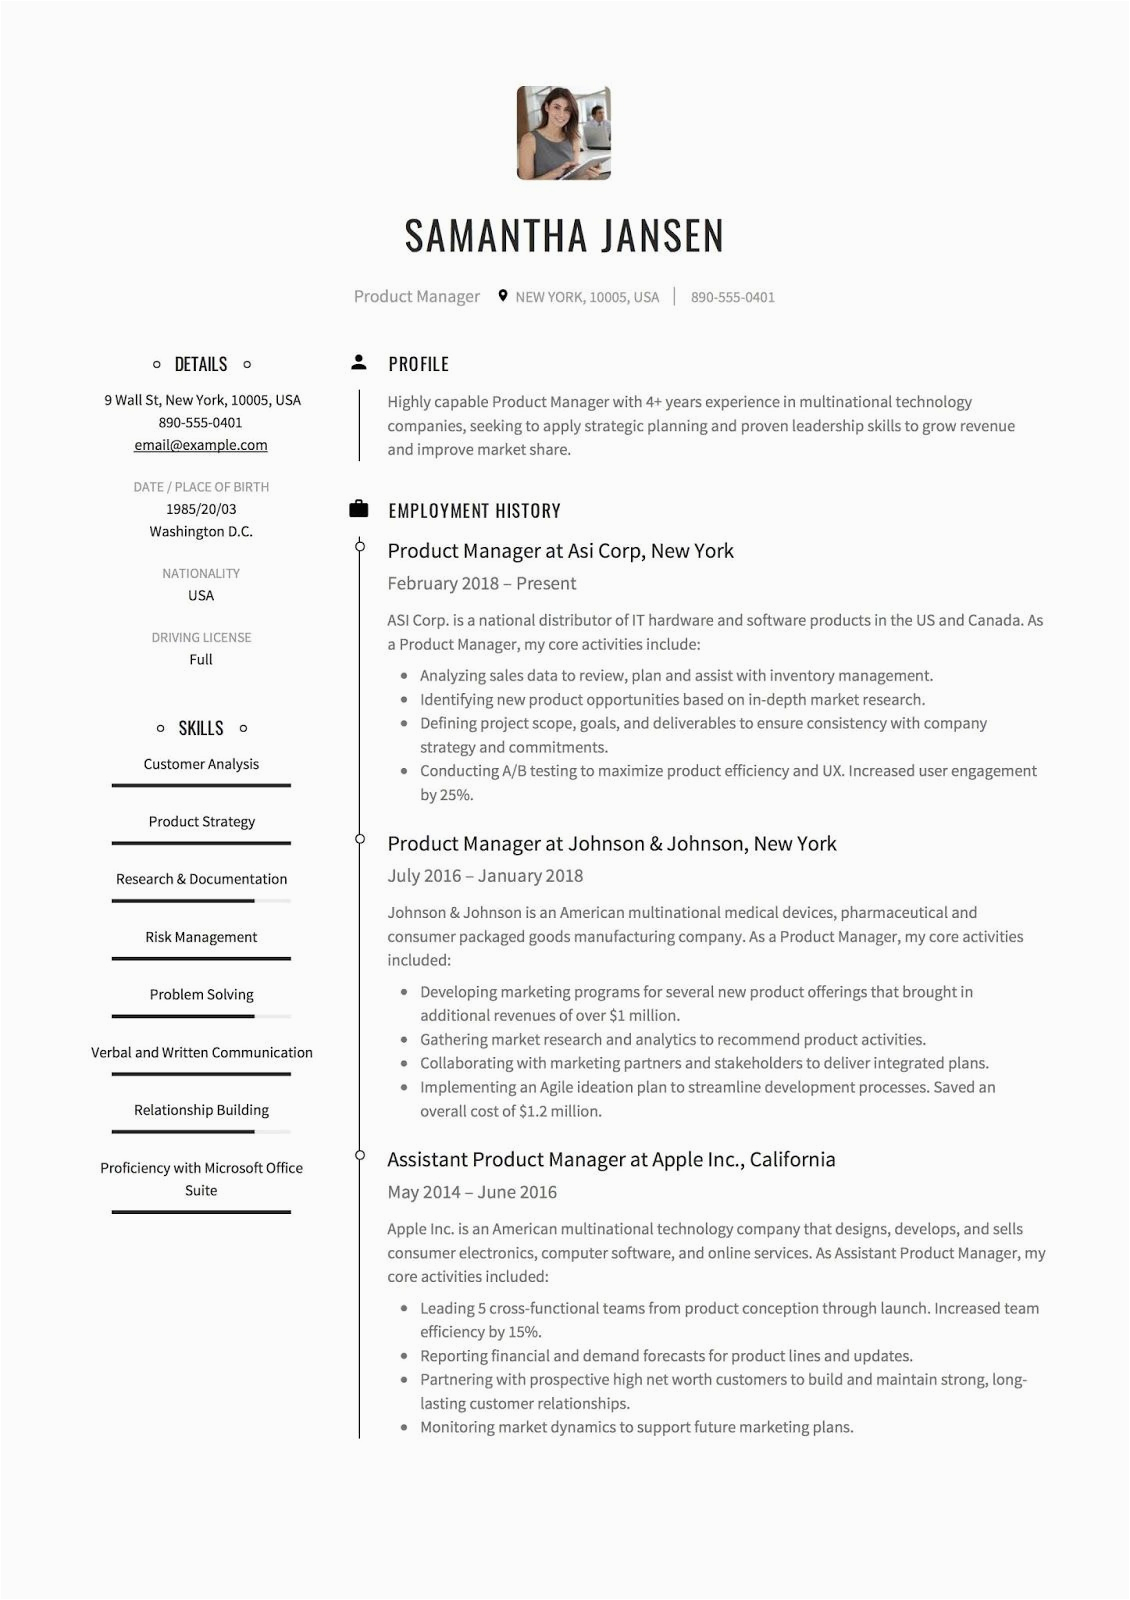 Purchase Manager Resume Samples India Pdf Product Manager Resume Sample Product Manager Resume